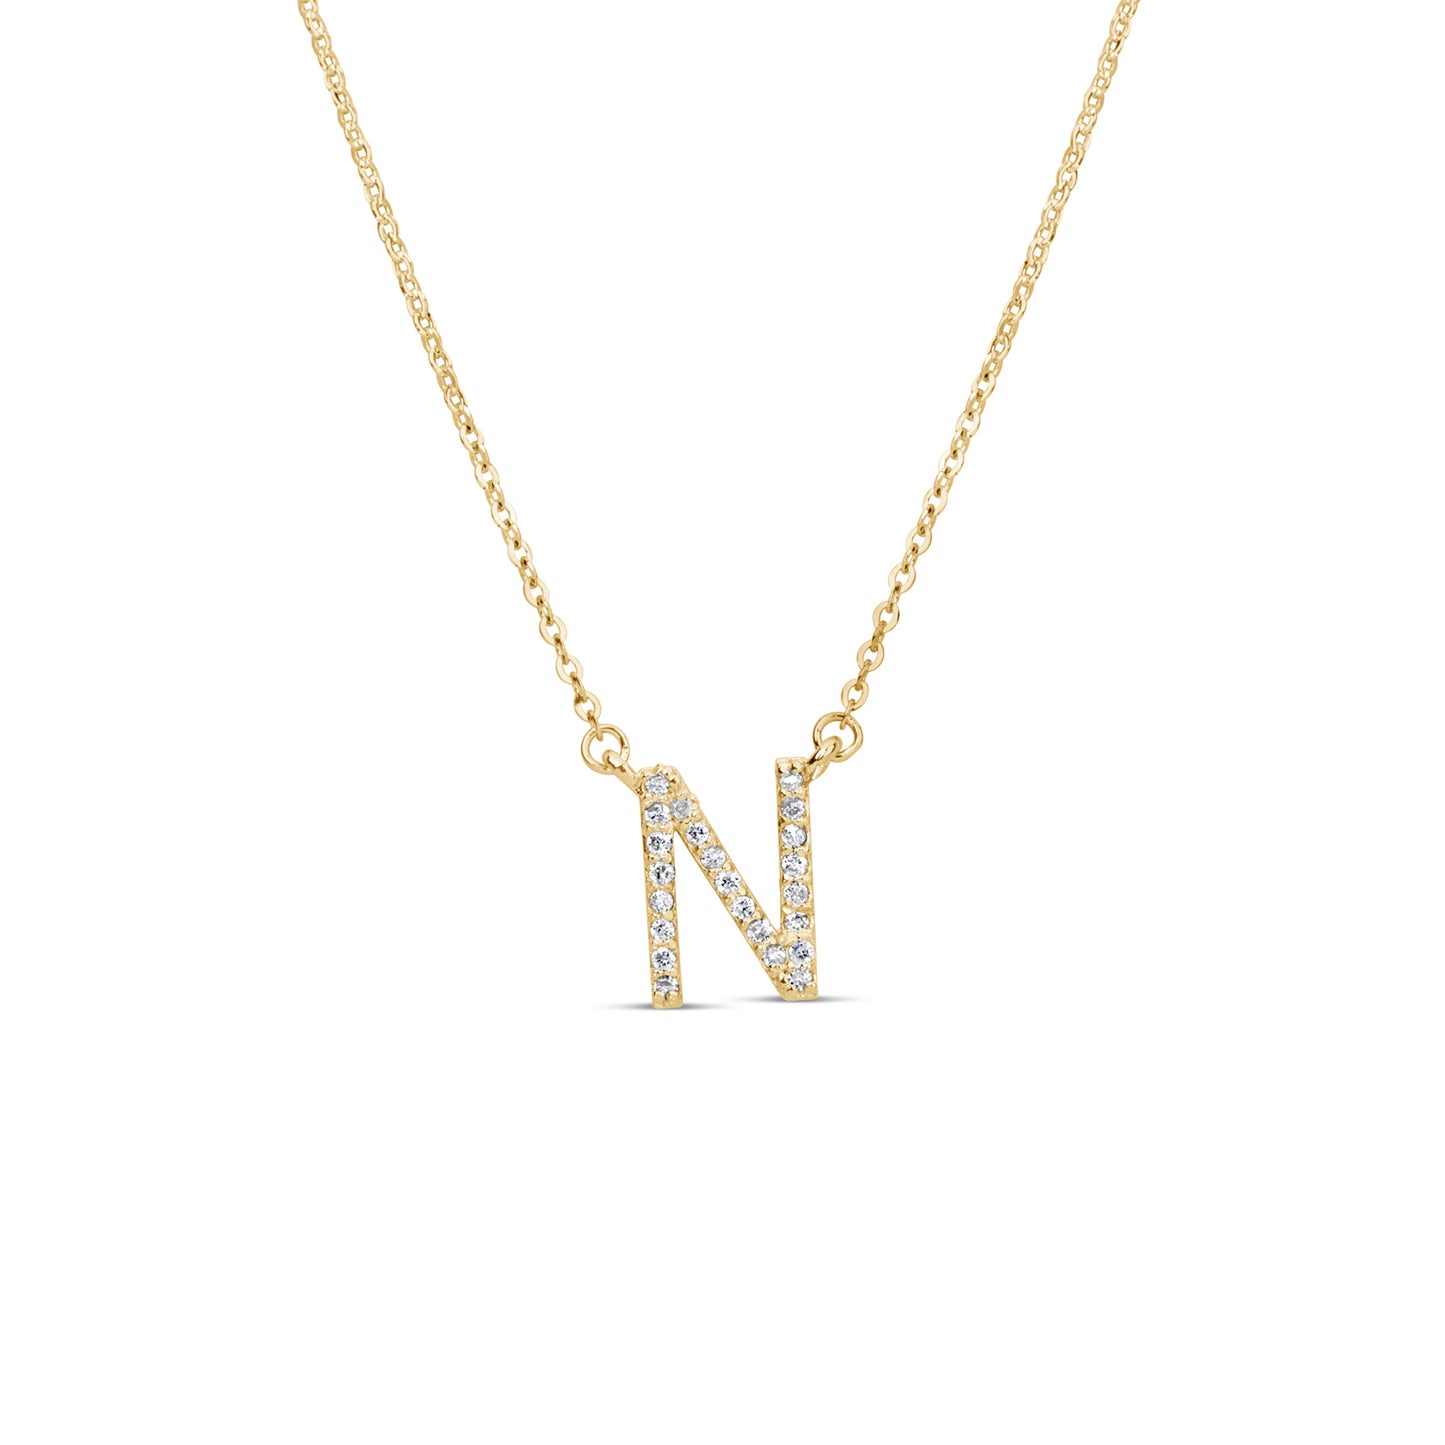 Suzy Levian 14K Yellow Gold 0.10 ctw Diamond Letter Initial Necklace